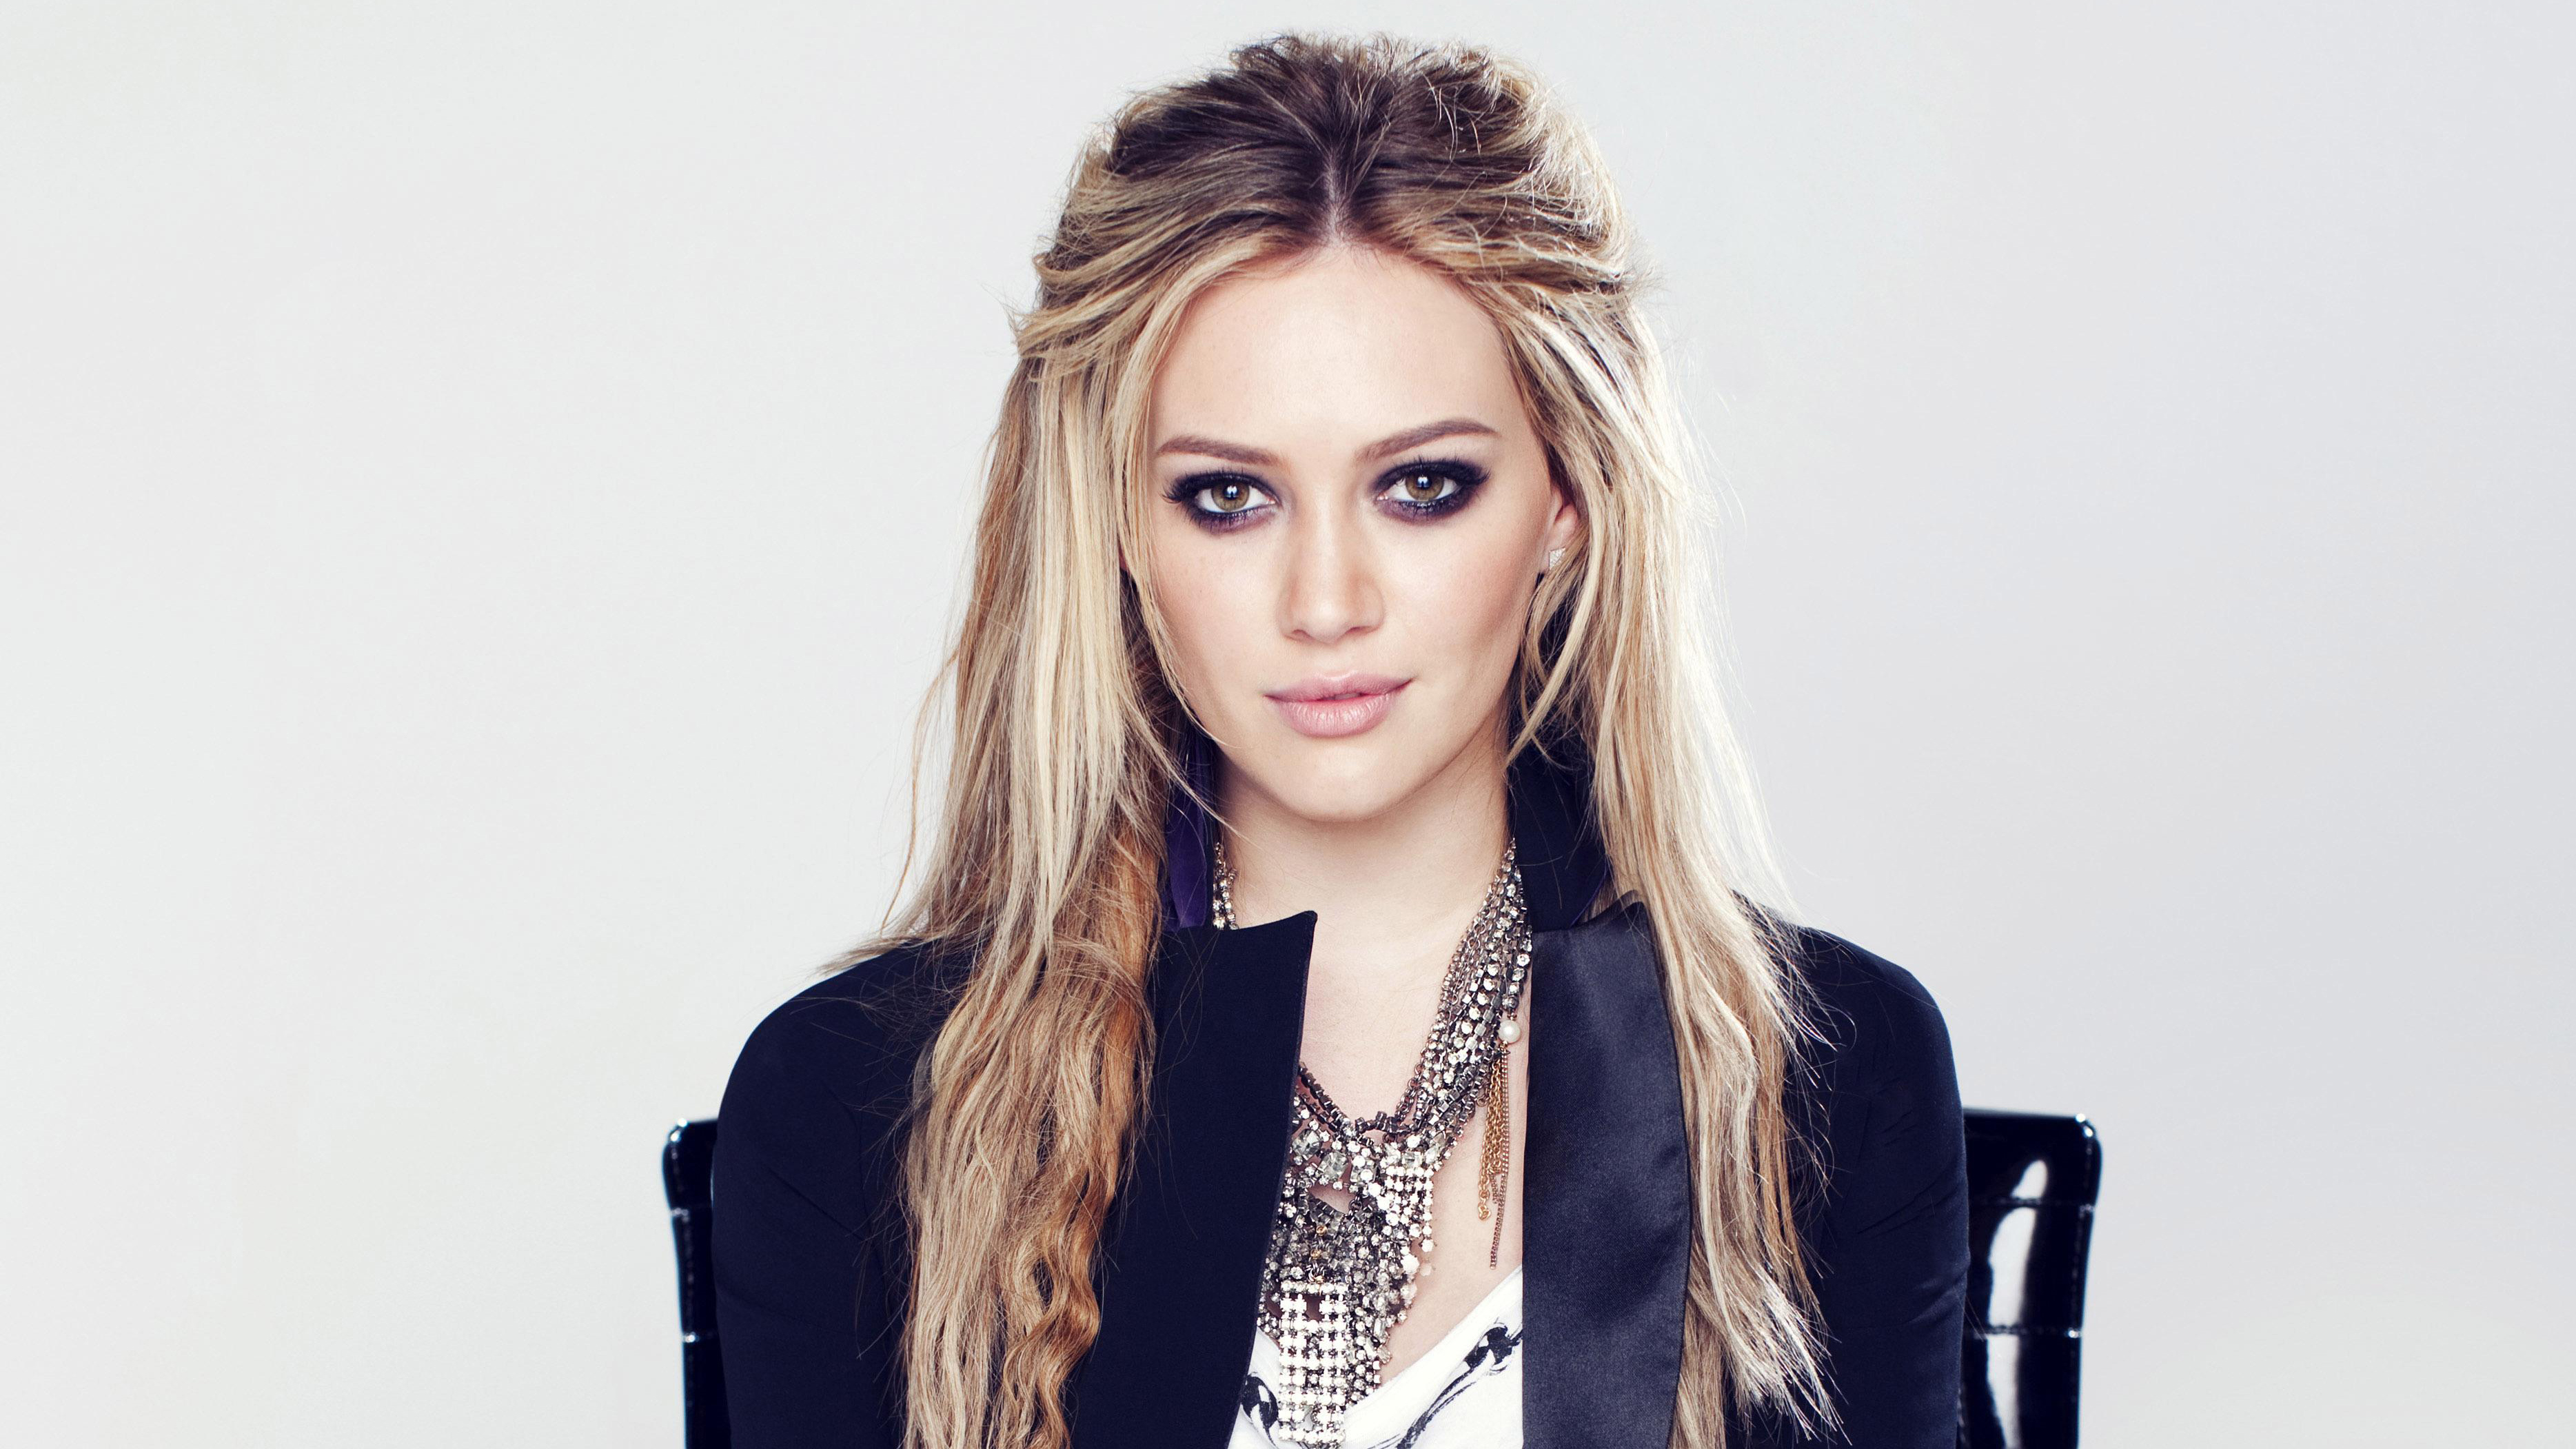 Actress American Blonde Hilary Duff Long Hair Necklace Singer Stare 3737x2102